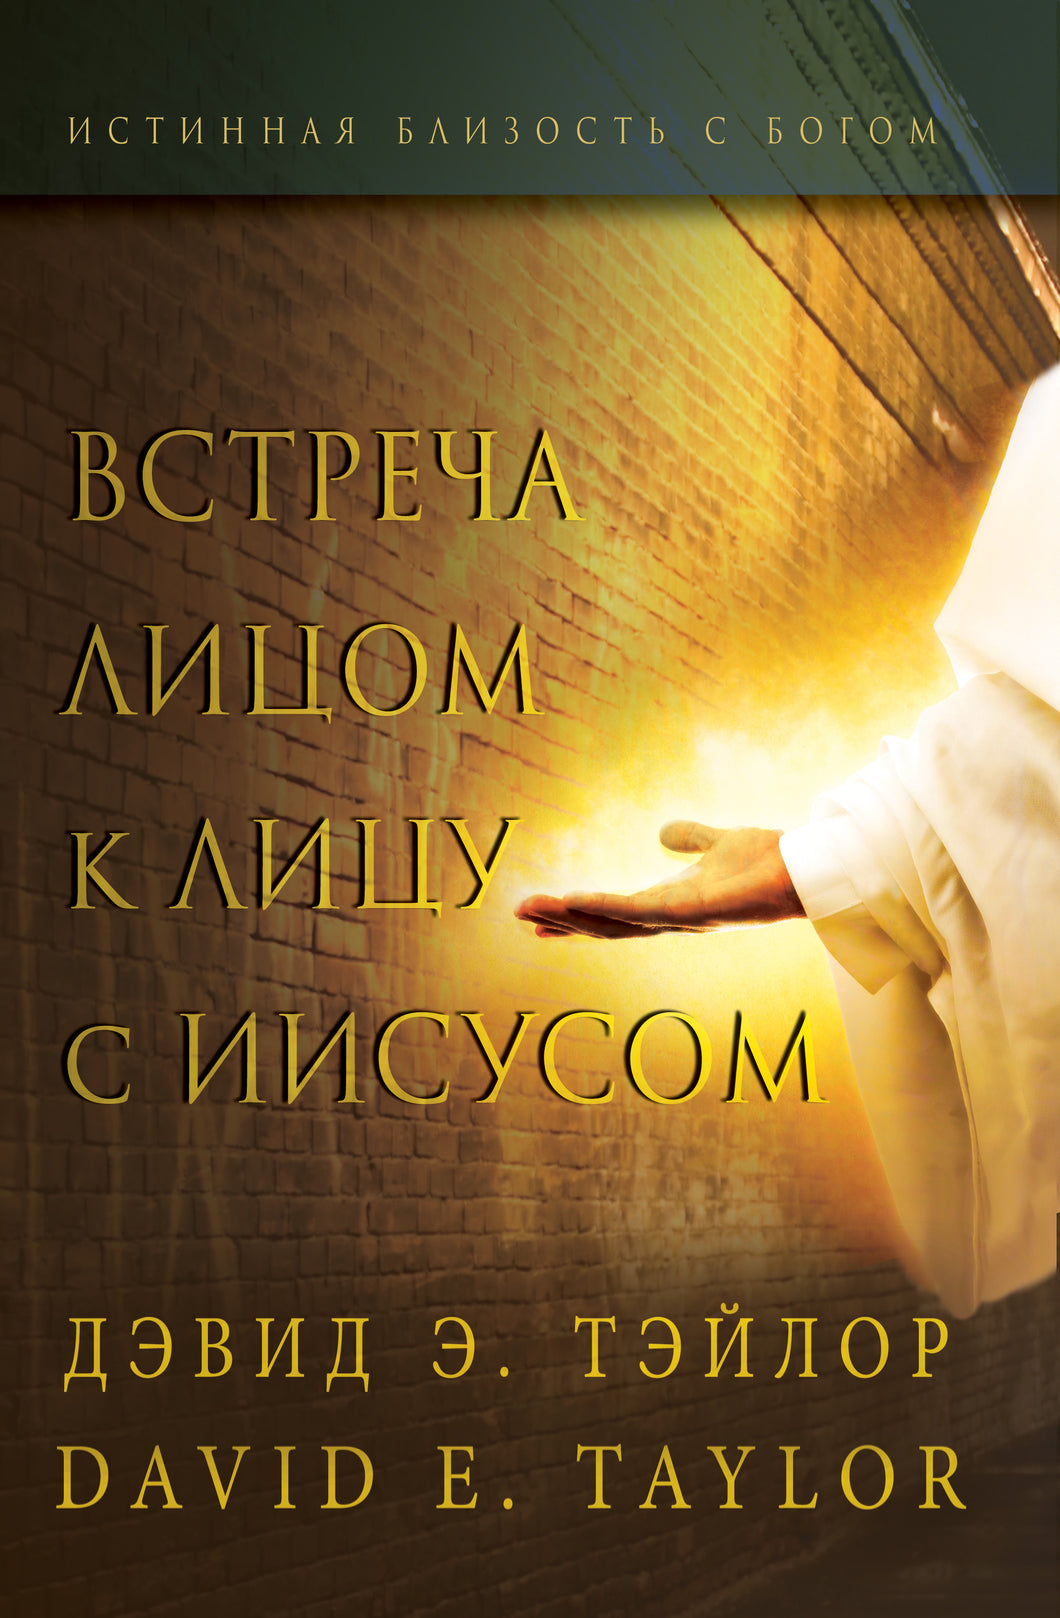 Russian – Face to Face Appearances from Jesus E-Book